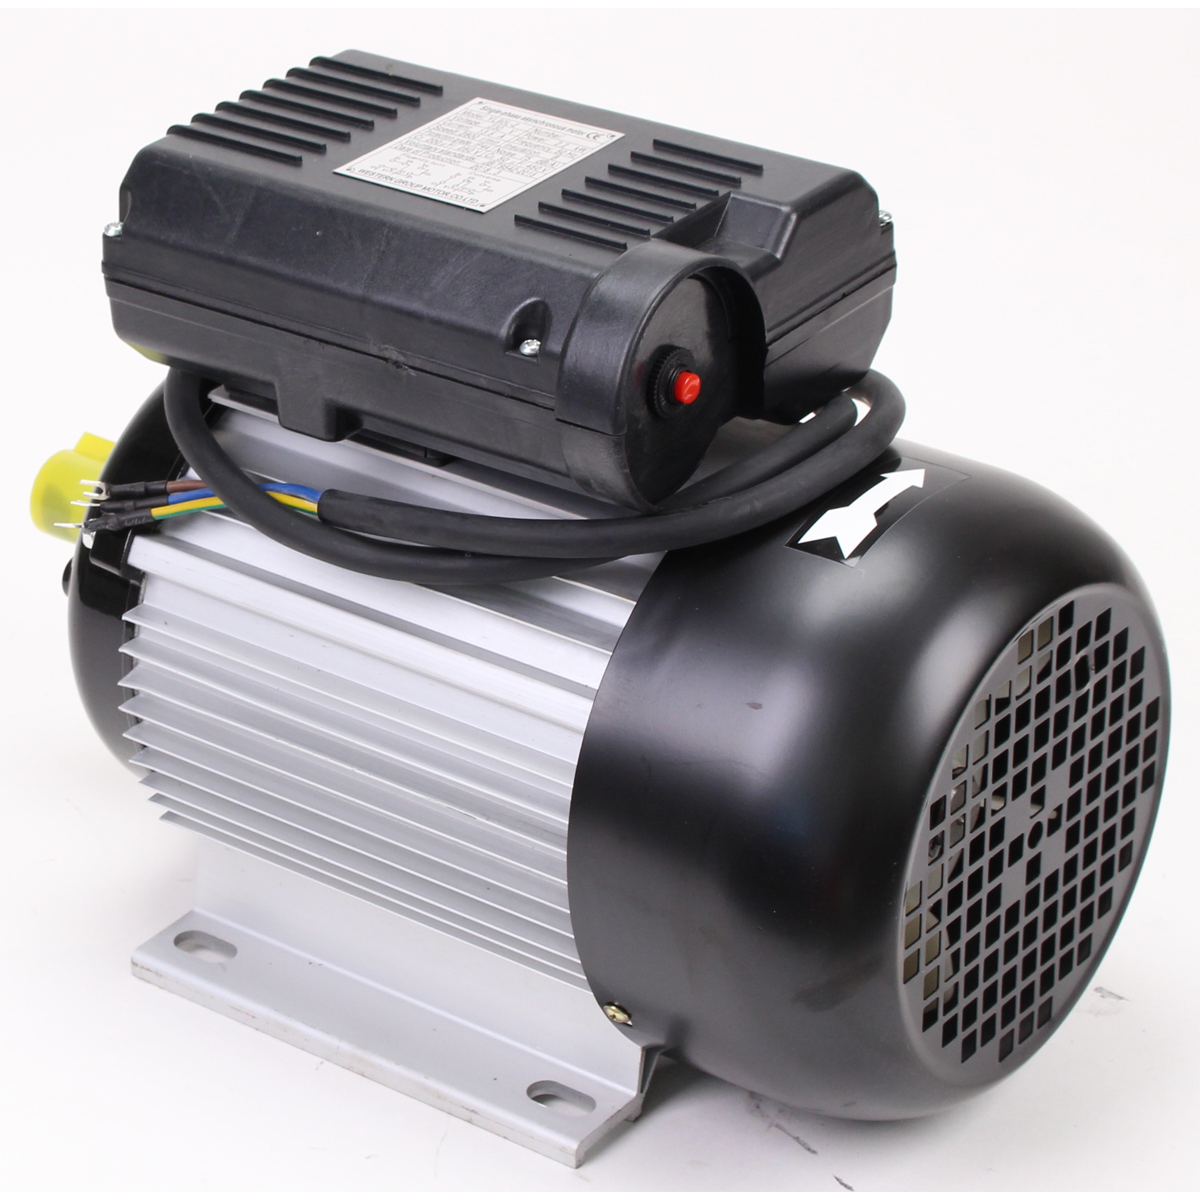 Air compressor Electrical Motor 3hp 2.2kw